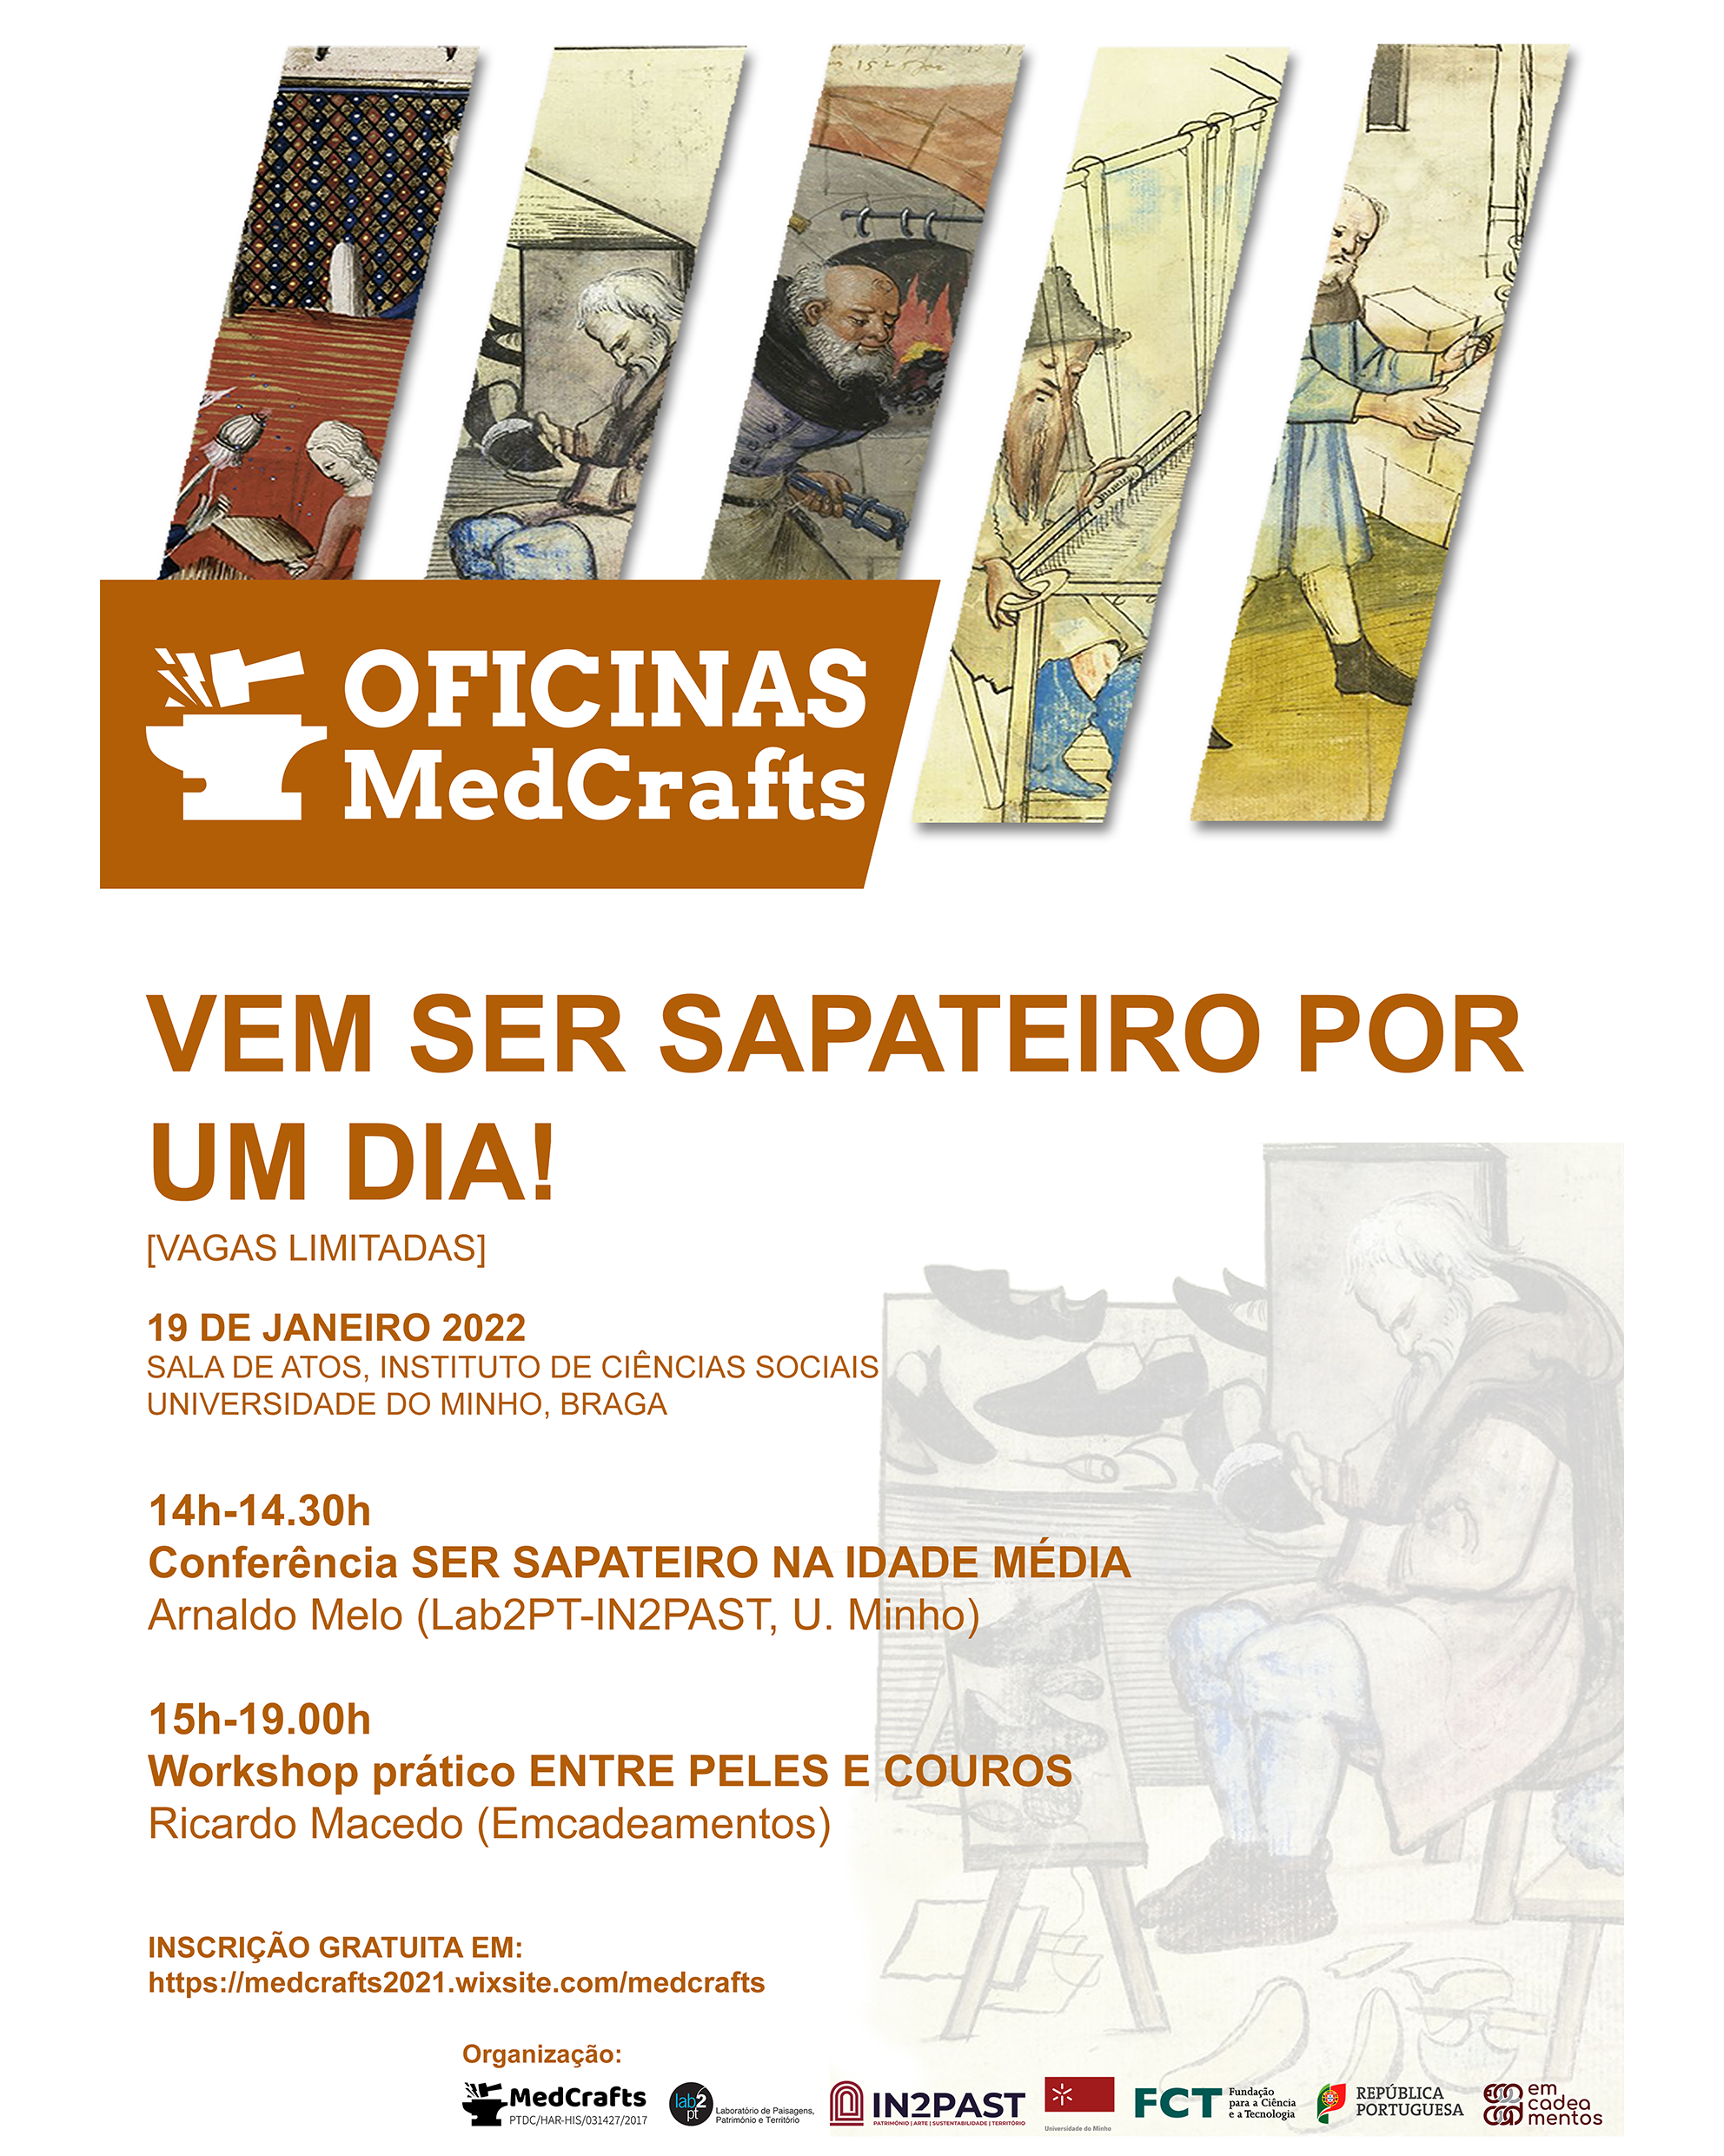 MedCrafts Workshops - cycle of conferences and hands-on workshops: "To be a shoemaker in the Middle Ages" image